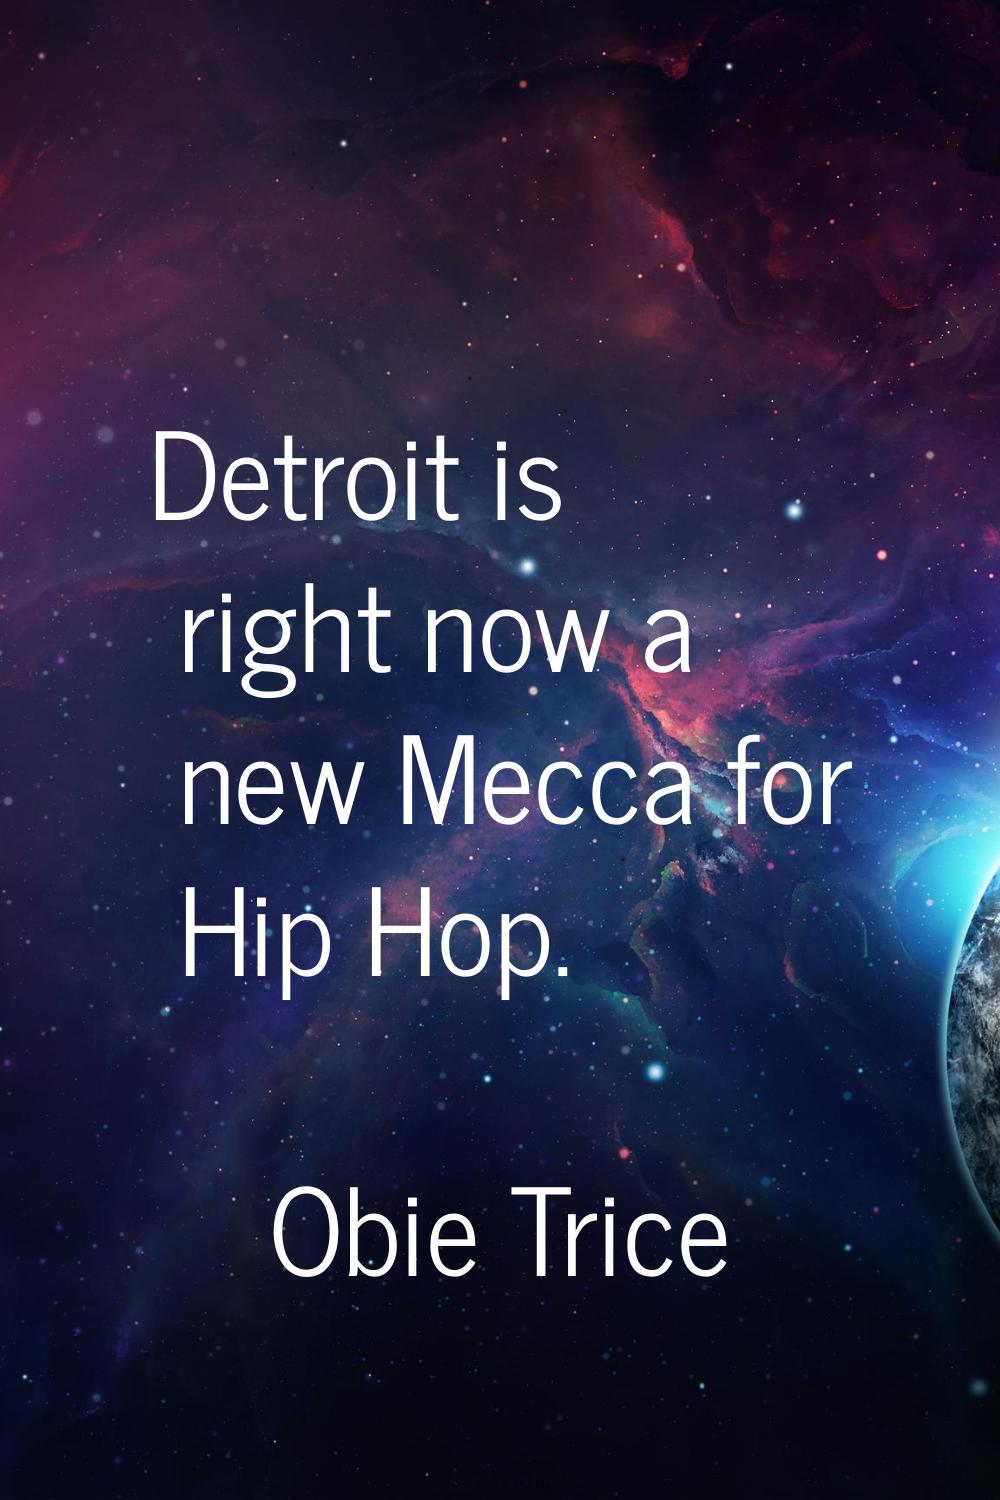 Detroit is right now a new Mecca for Hip Hop.